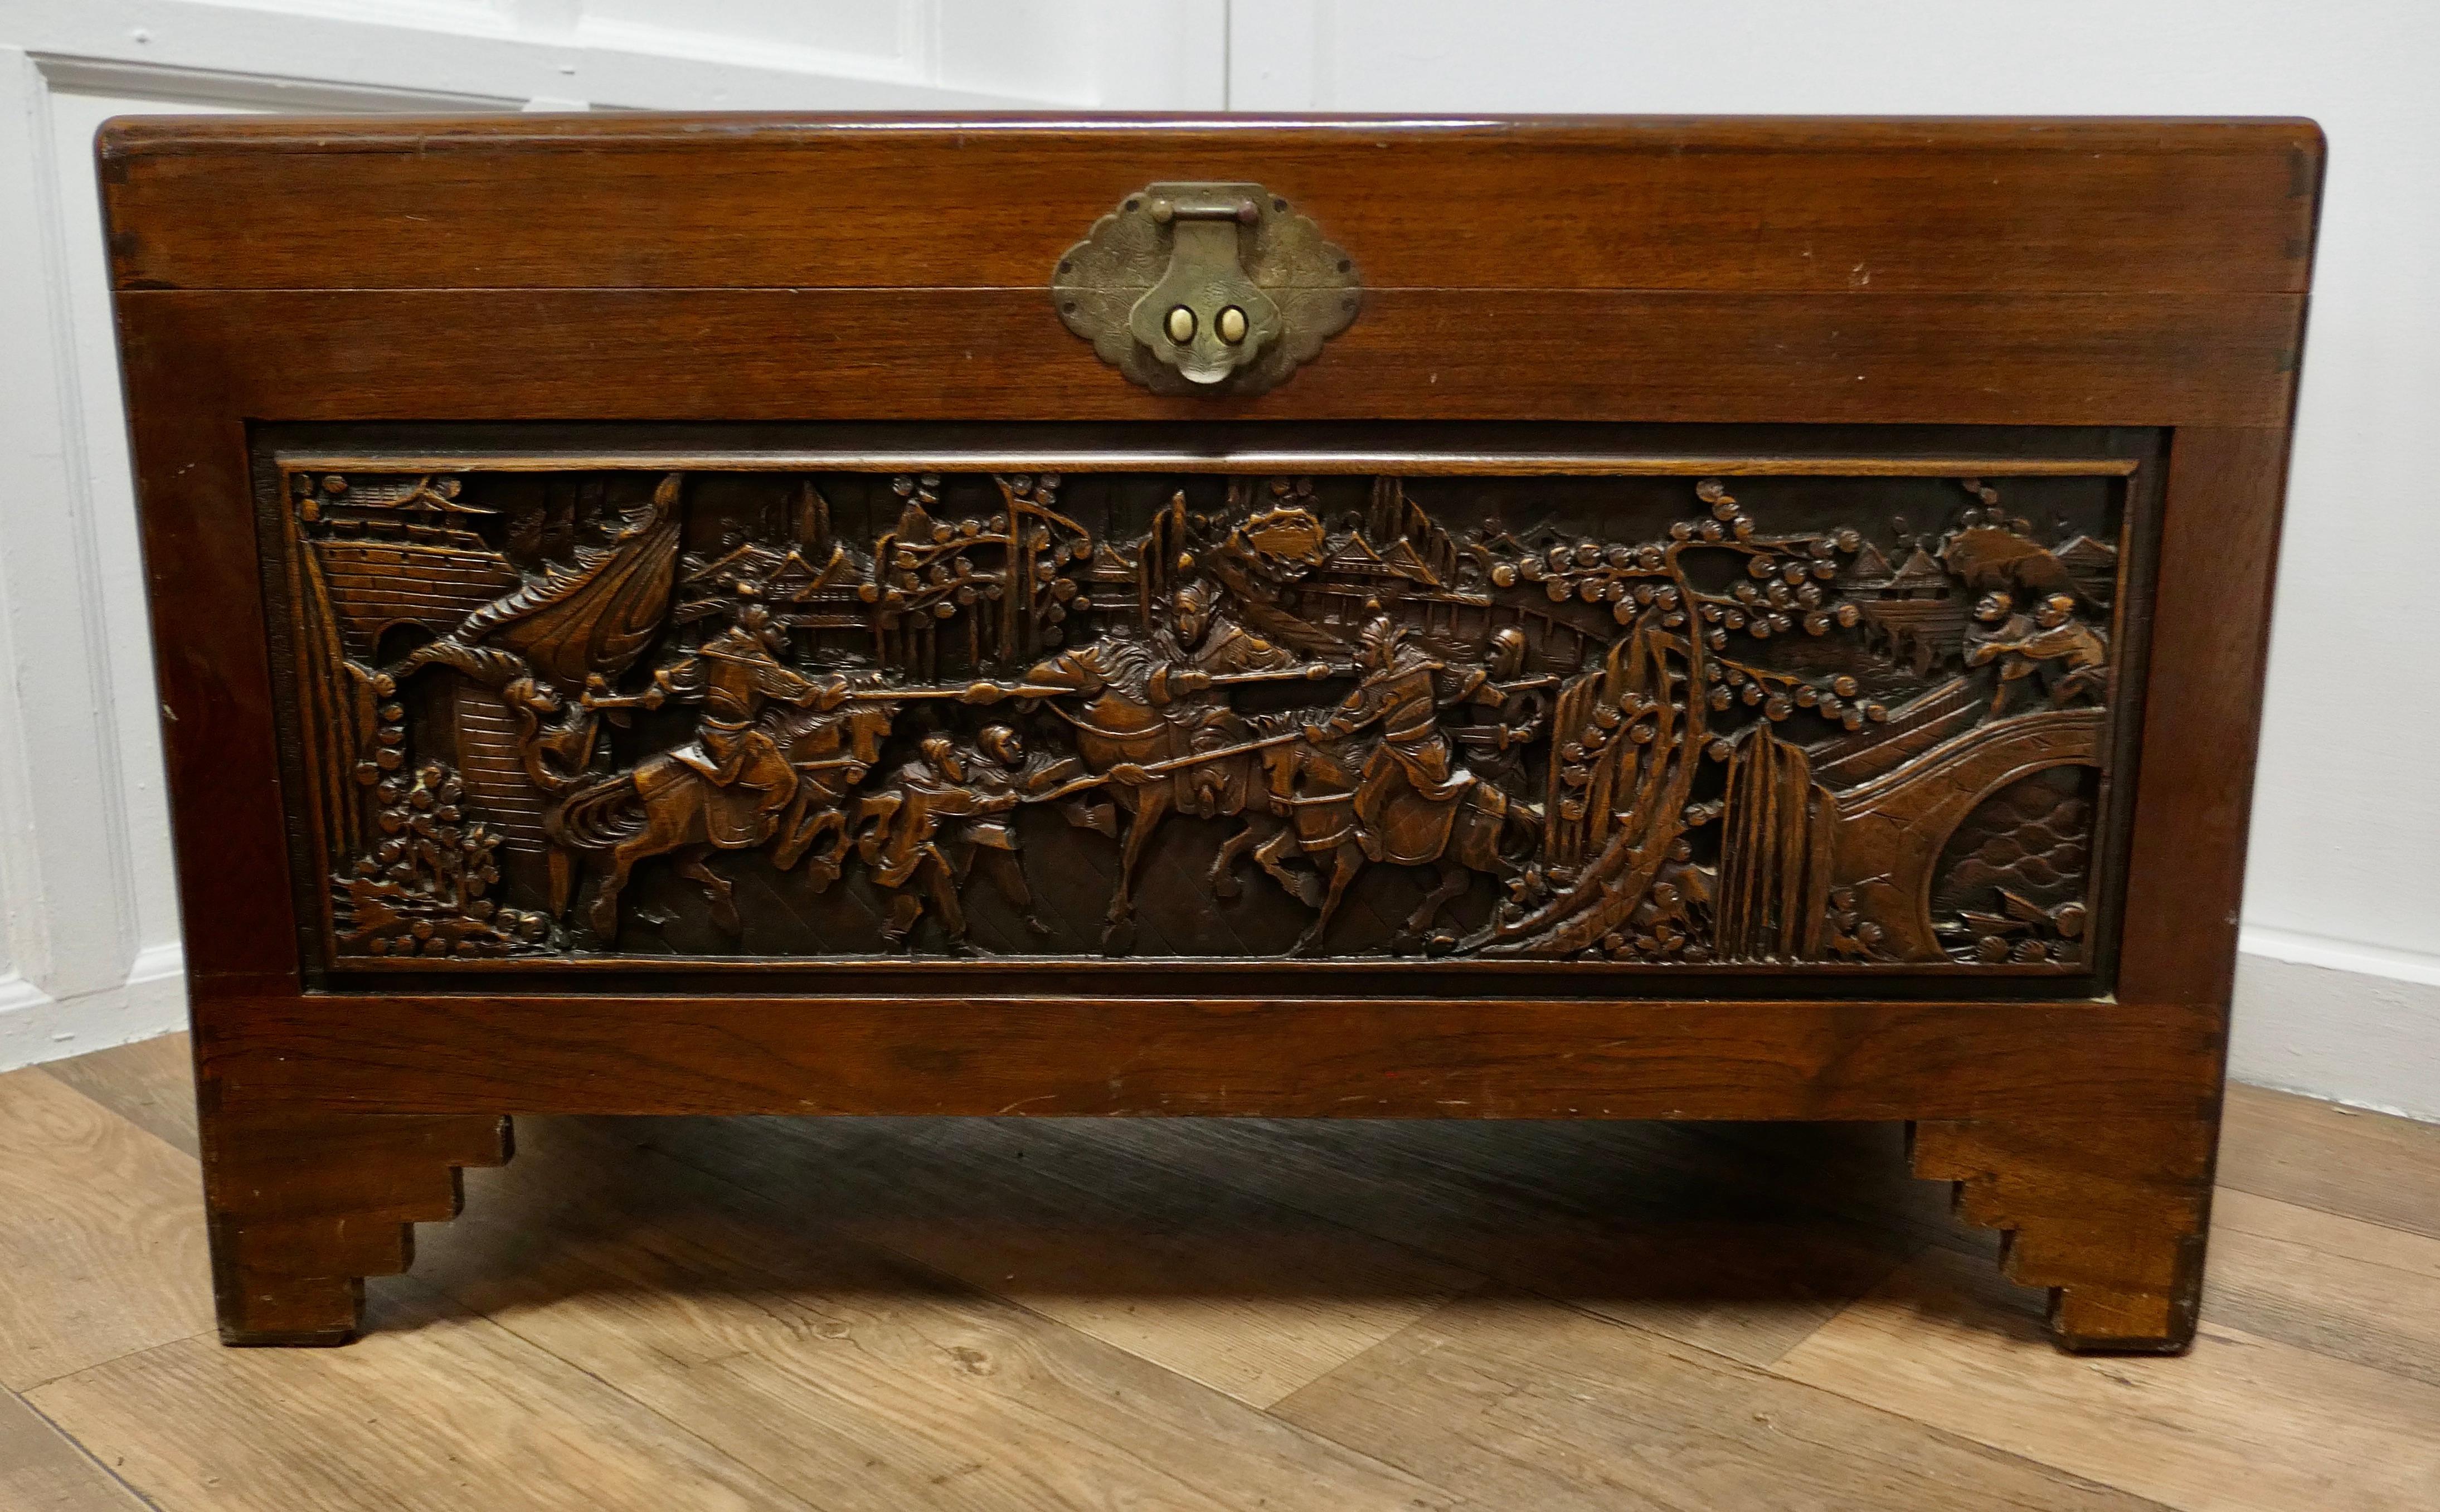 Large Carved Oriental Camphor Wood Chest

This Carved Chest is made from Camphor Wood, for those of you who do not know camphor wood it is a hard wood which lends itself very well to carving.
However the main reason for using camphor wood is its